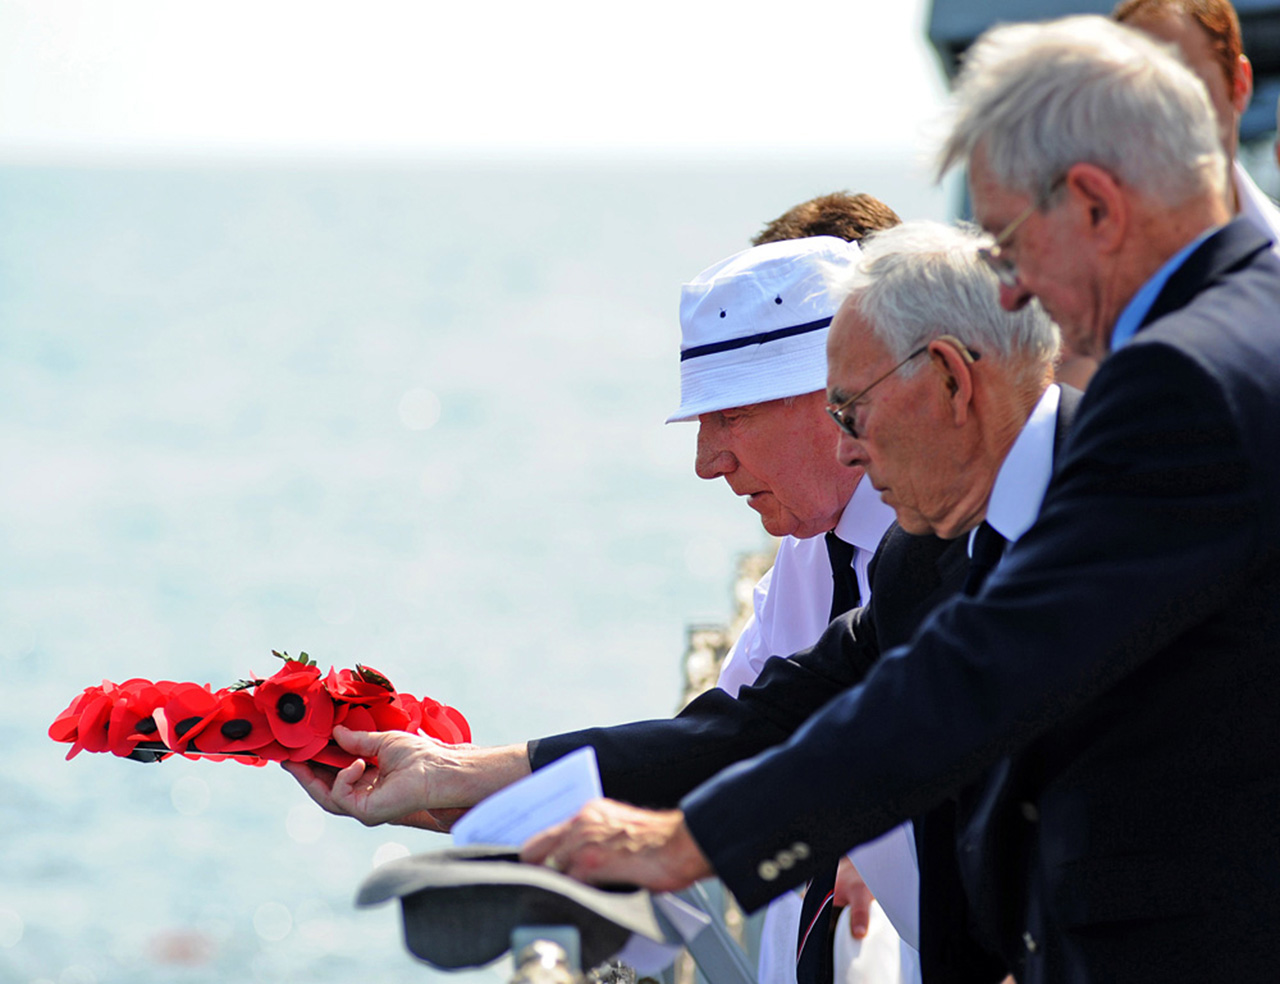 Full of thoughtfulness and respect, the HMS Exeter sinking veterans solemnly prepare to place a floral wreath over the wreck of their old ship.